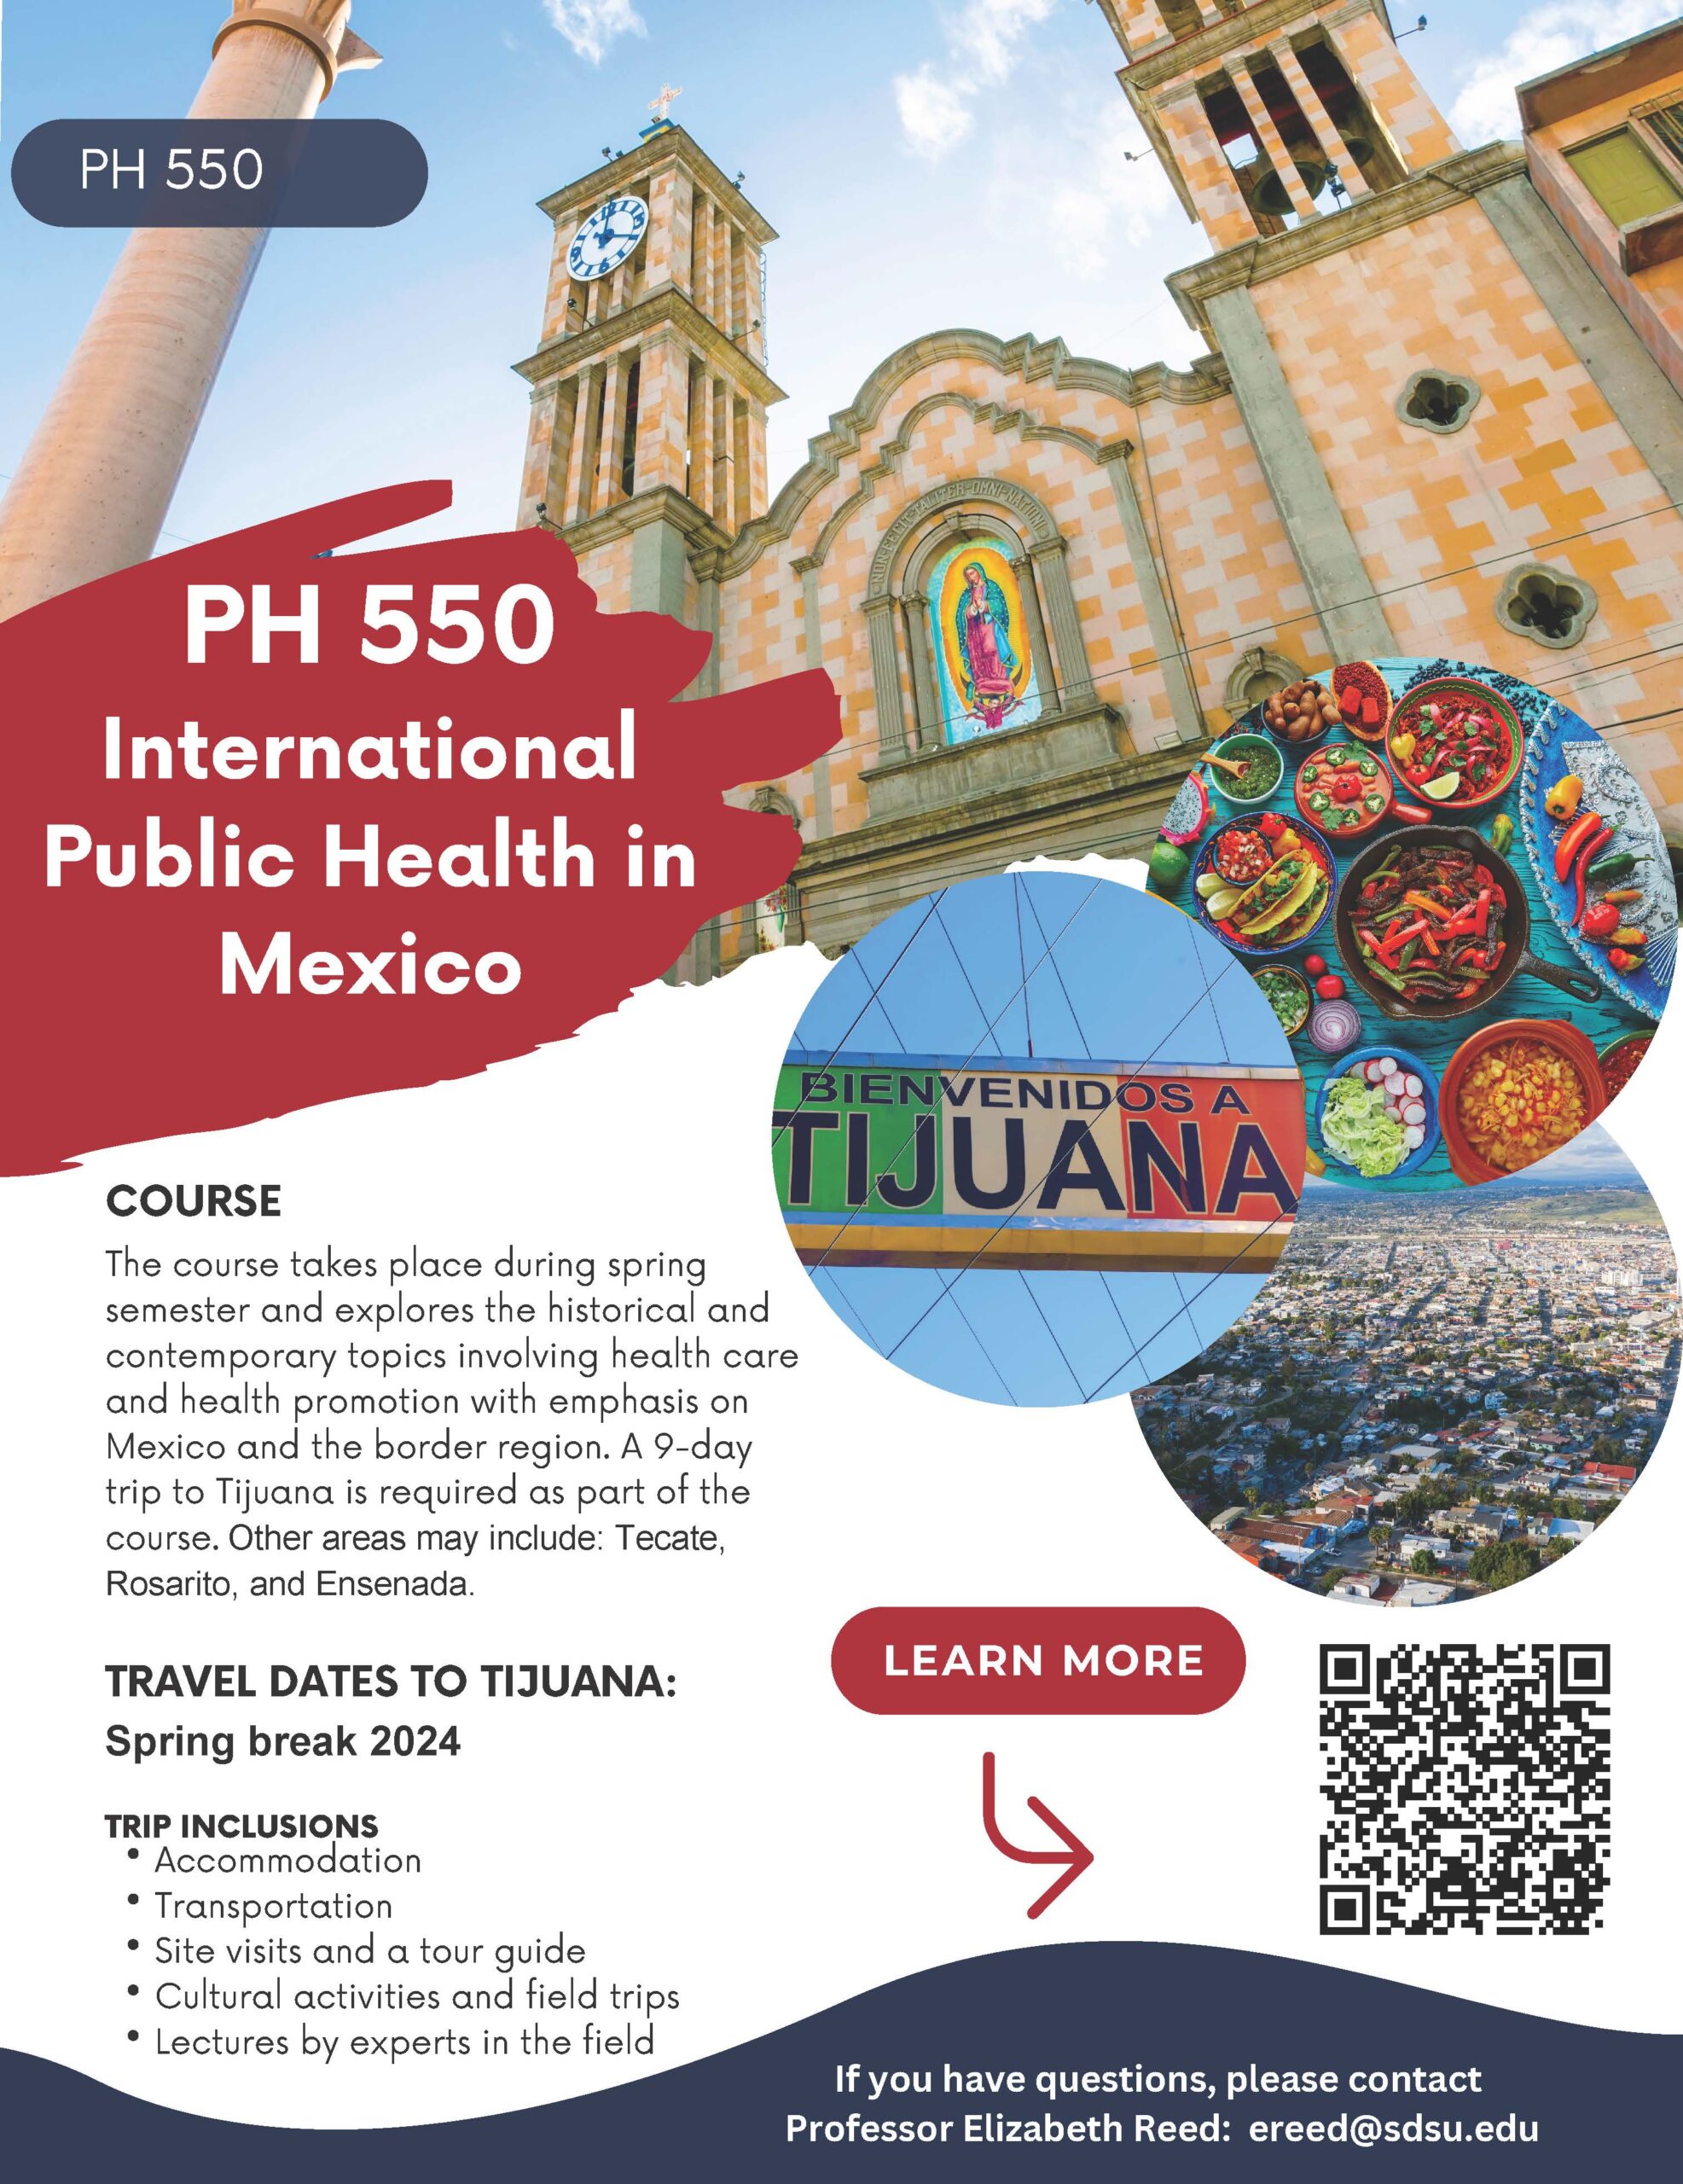 PH 550 International Public Health in Mexico COURSE The course takes place during spring semester and explores the historical and contemporary topics involving health care and health promotion with emphasis on Mexico and the border region. A 9-day trip to Tijuana is required as part of the course. Other areas may include: Tecate, Rosarito, and Ensenada. TRAVEL DATES TO TIJUANA: Spring break 2024 TRIP INCLUSIONS PH 550 Accommodation Transportation Site visits and a tour guide Cultural activities and field trips Lectures by experts in the field If you have questions, please contact Professor Elizabeth Reed: ereed@sdsu.edu